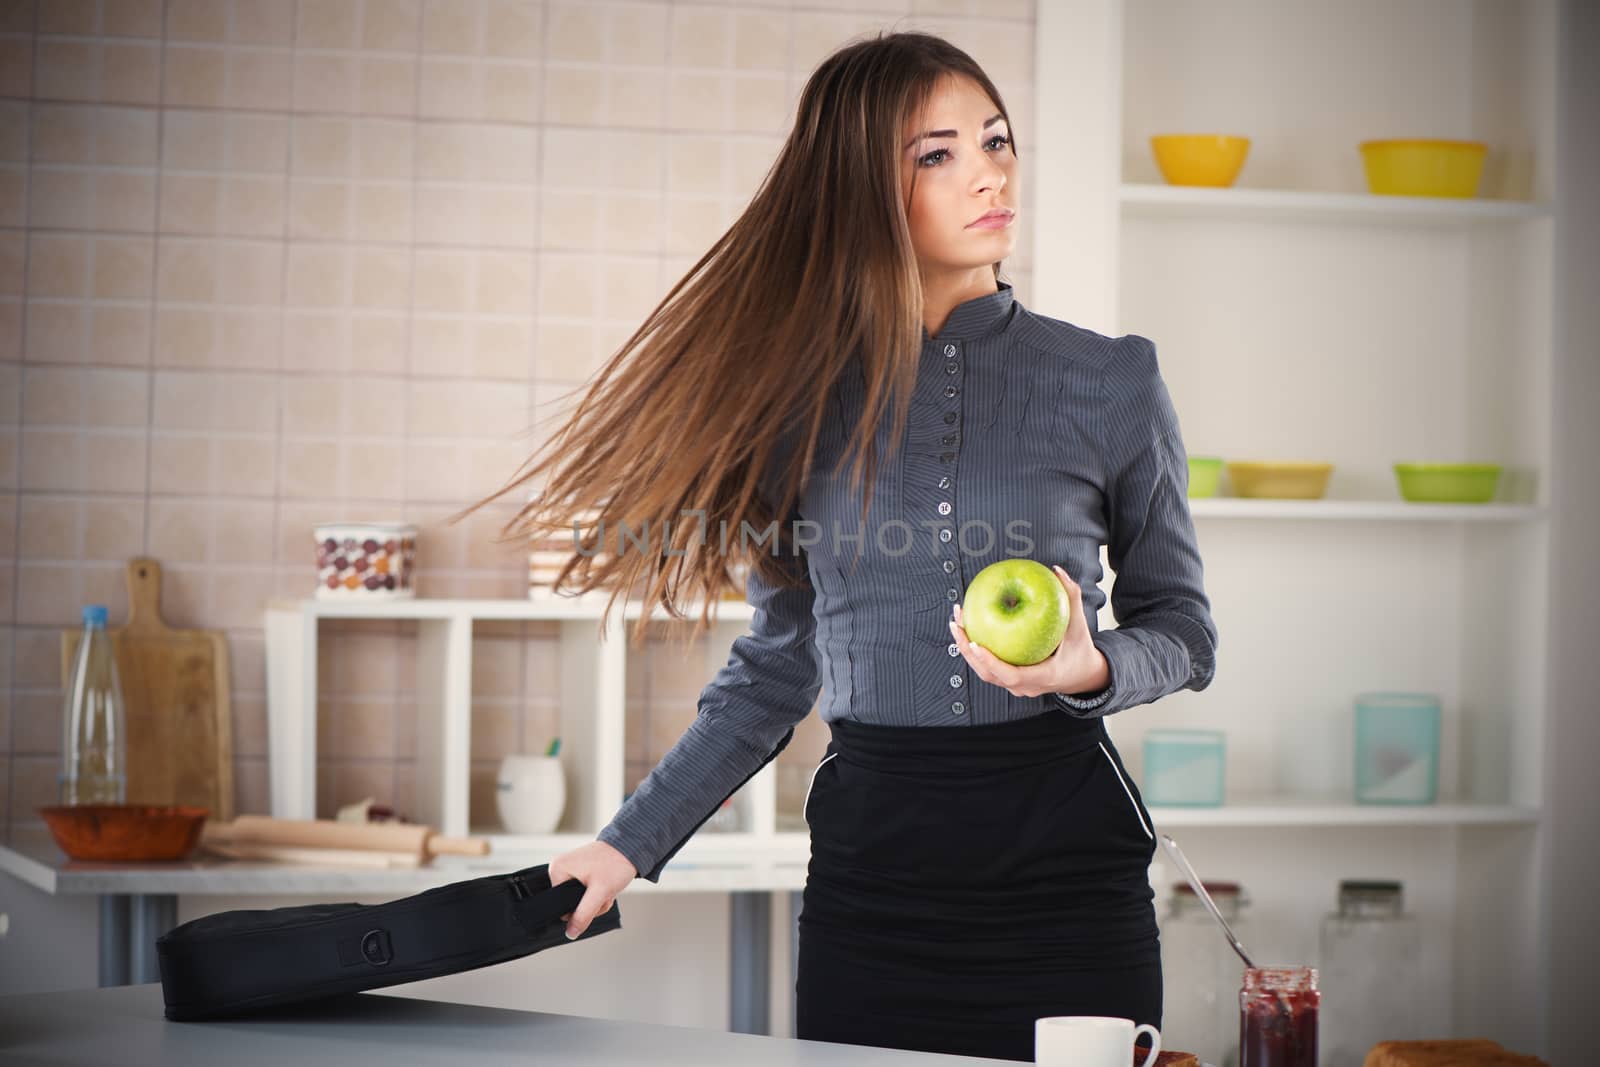 Businesswoman in the kitchen getting ready for work. She is rushing for work. Holding a bag with laptop in one hand and apple in other.